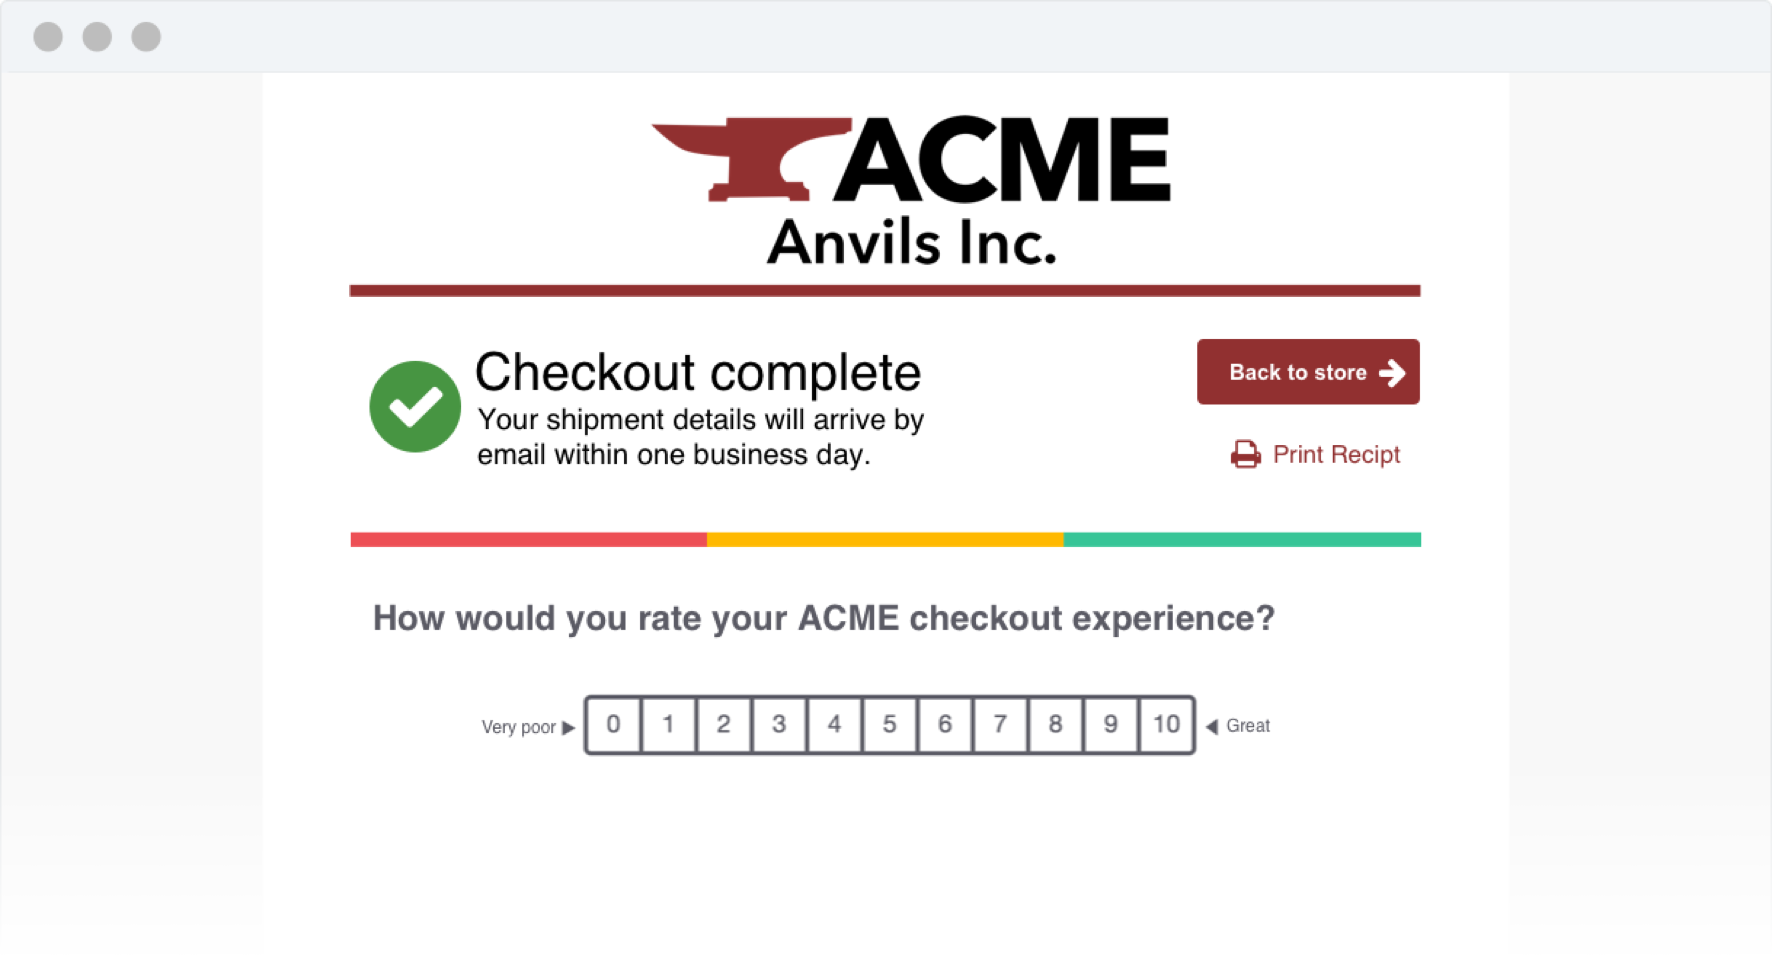 Embedded survey in post-checkout screen of e-commerce store